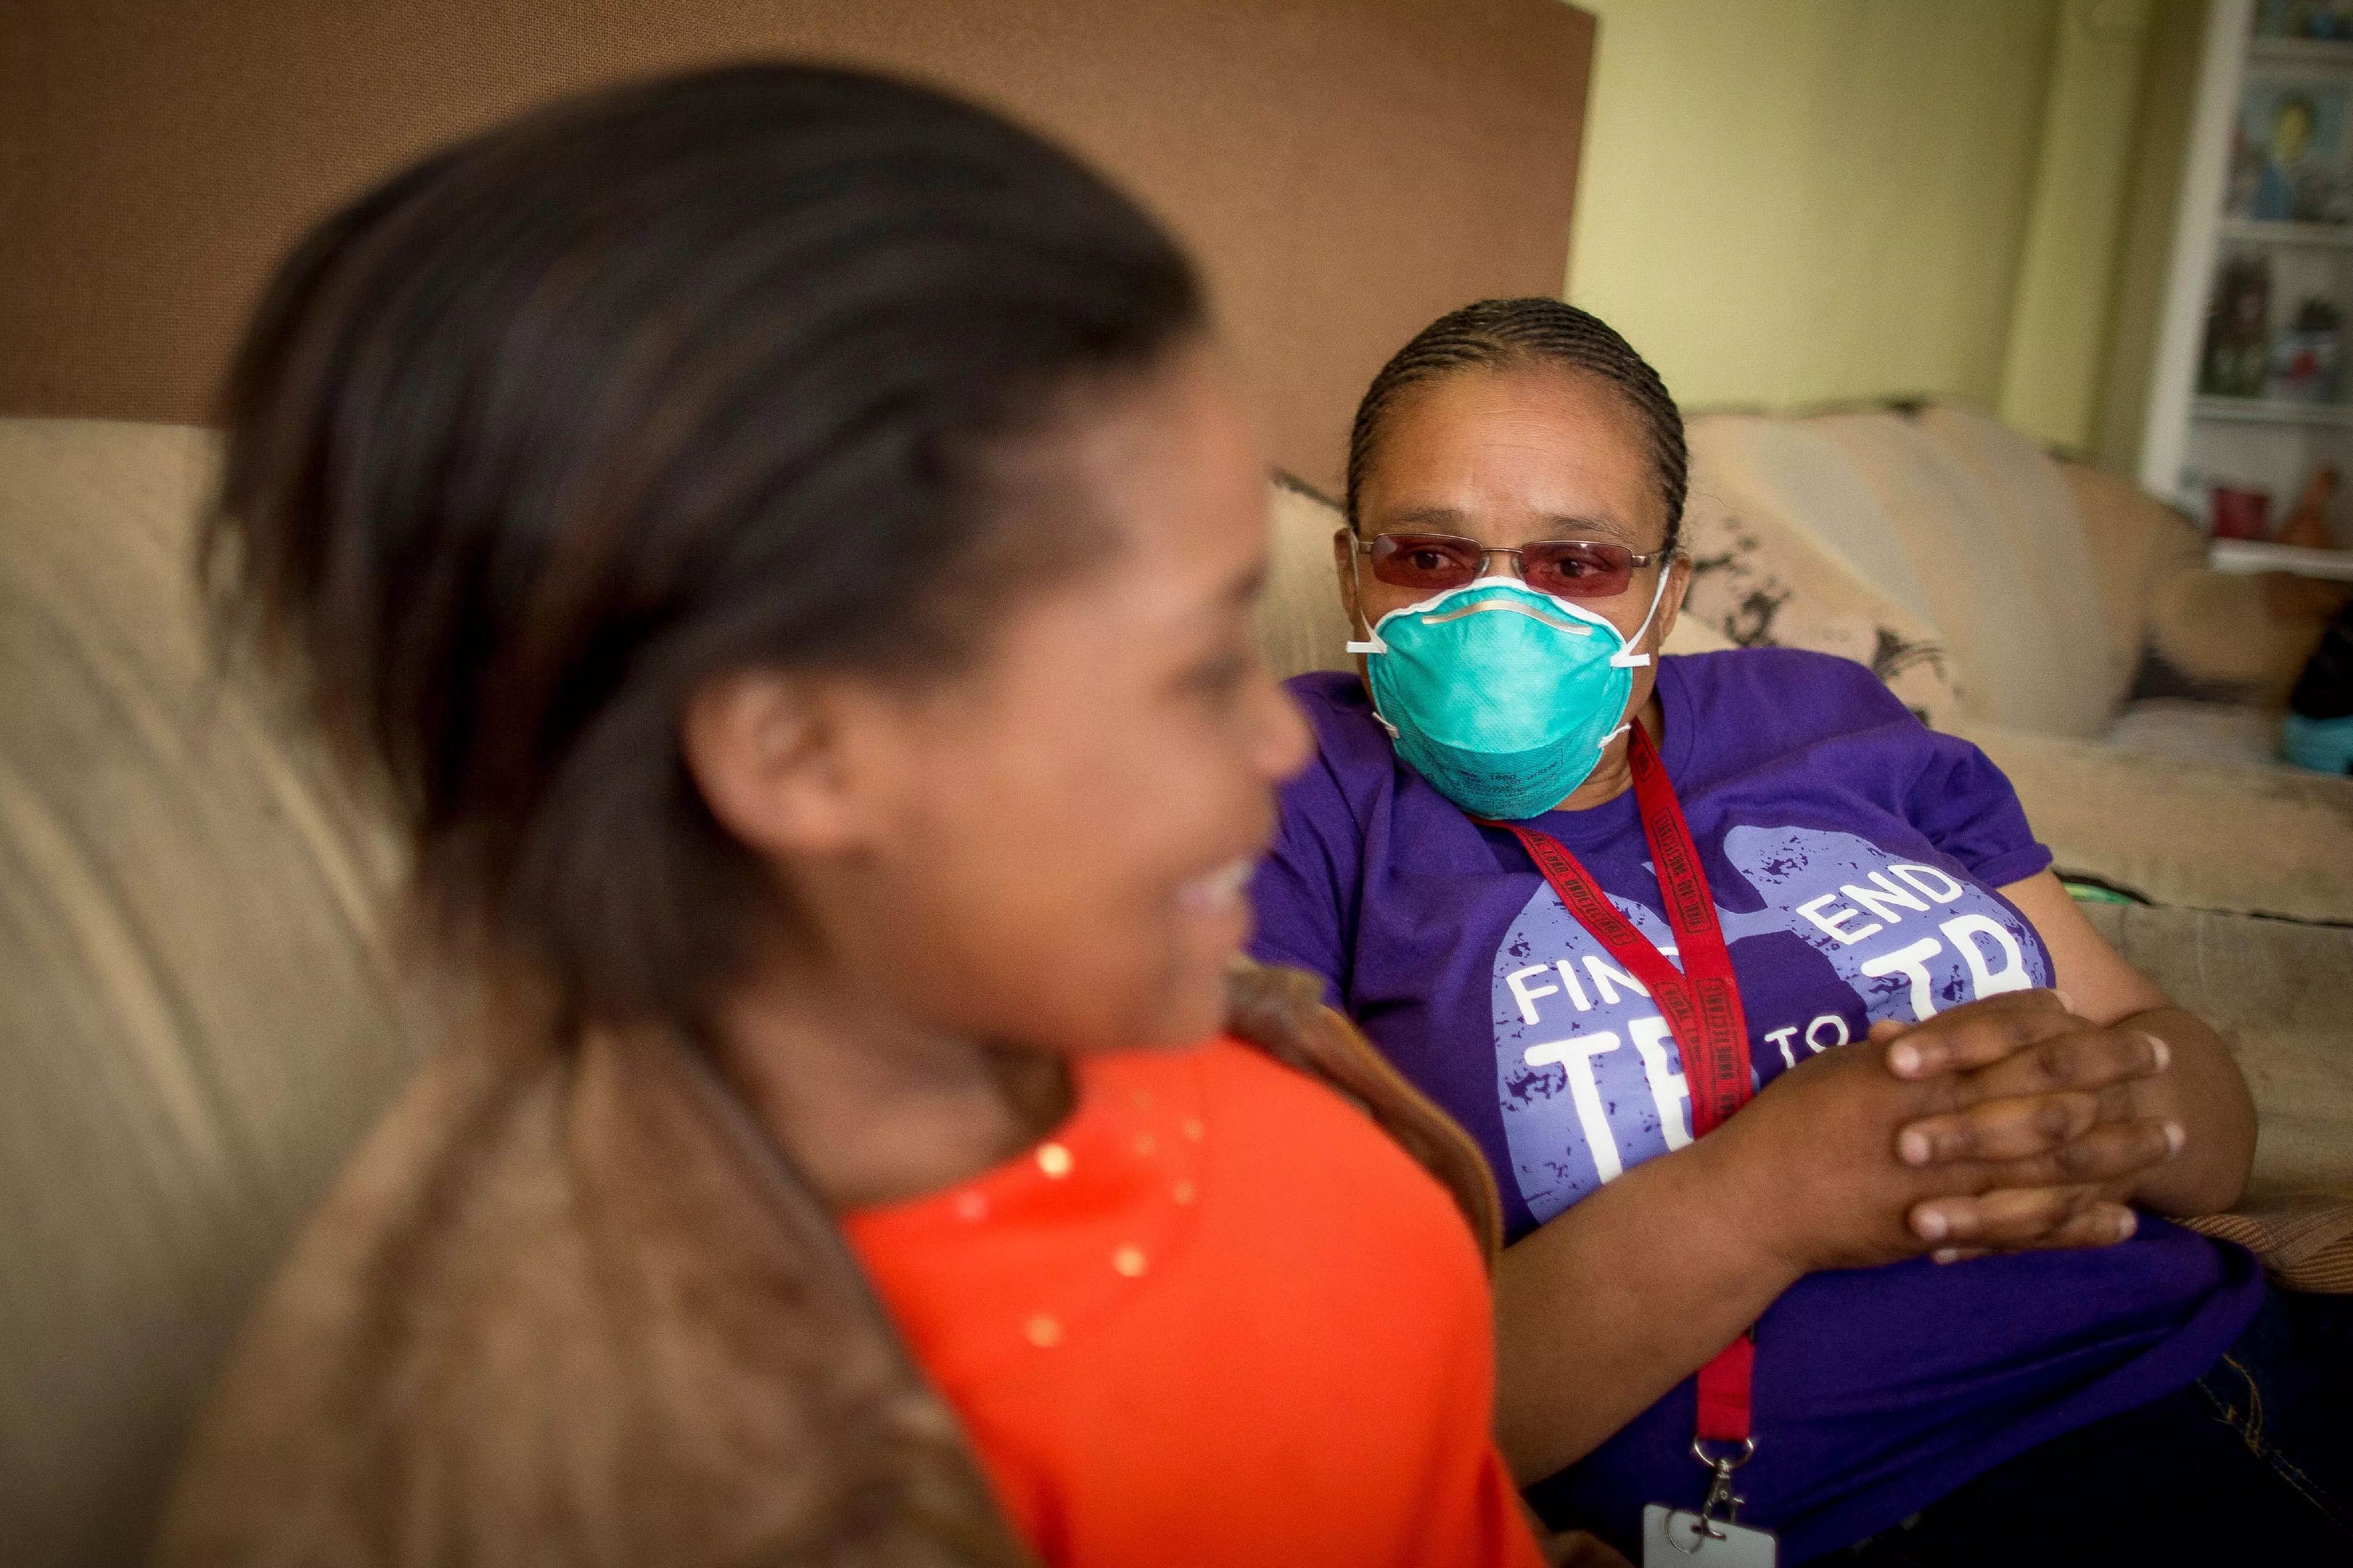   Sinethemba, 16 years,her MSF counsellor, Xoliswa, at her home in Khayelitsha, Western Cape, South Africa, where she lives with her grandmother, Vuyisiwa Madubela, and four other familtb_southafrica_sinethembawithcounselor_msf177617_sydellwillowsmith.jpg